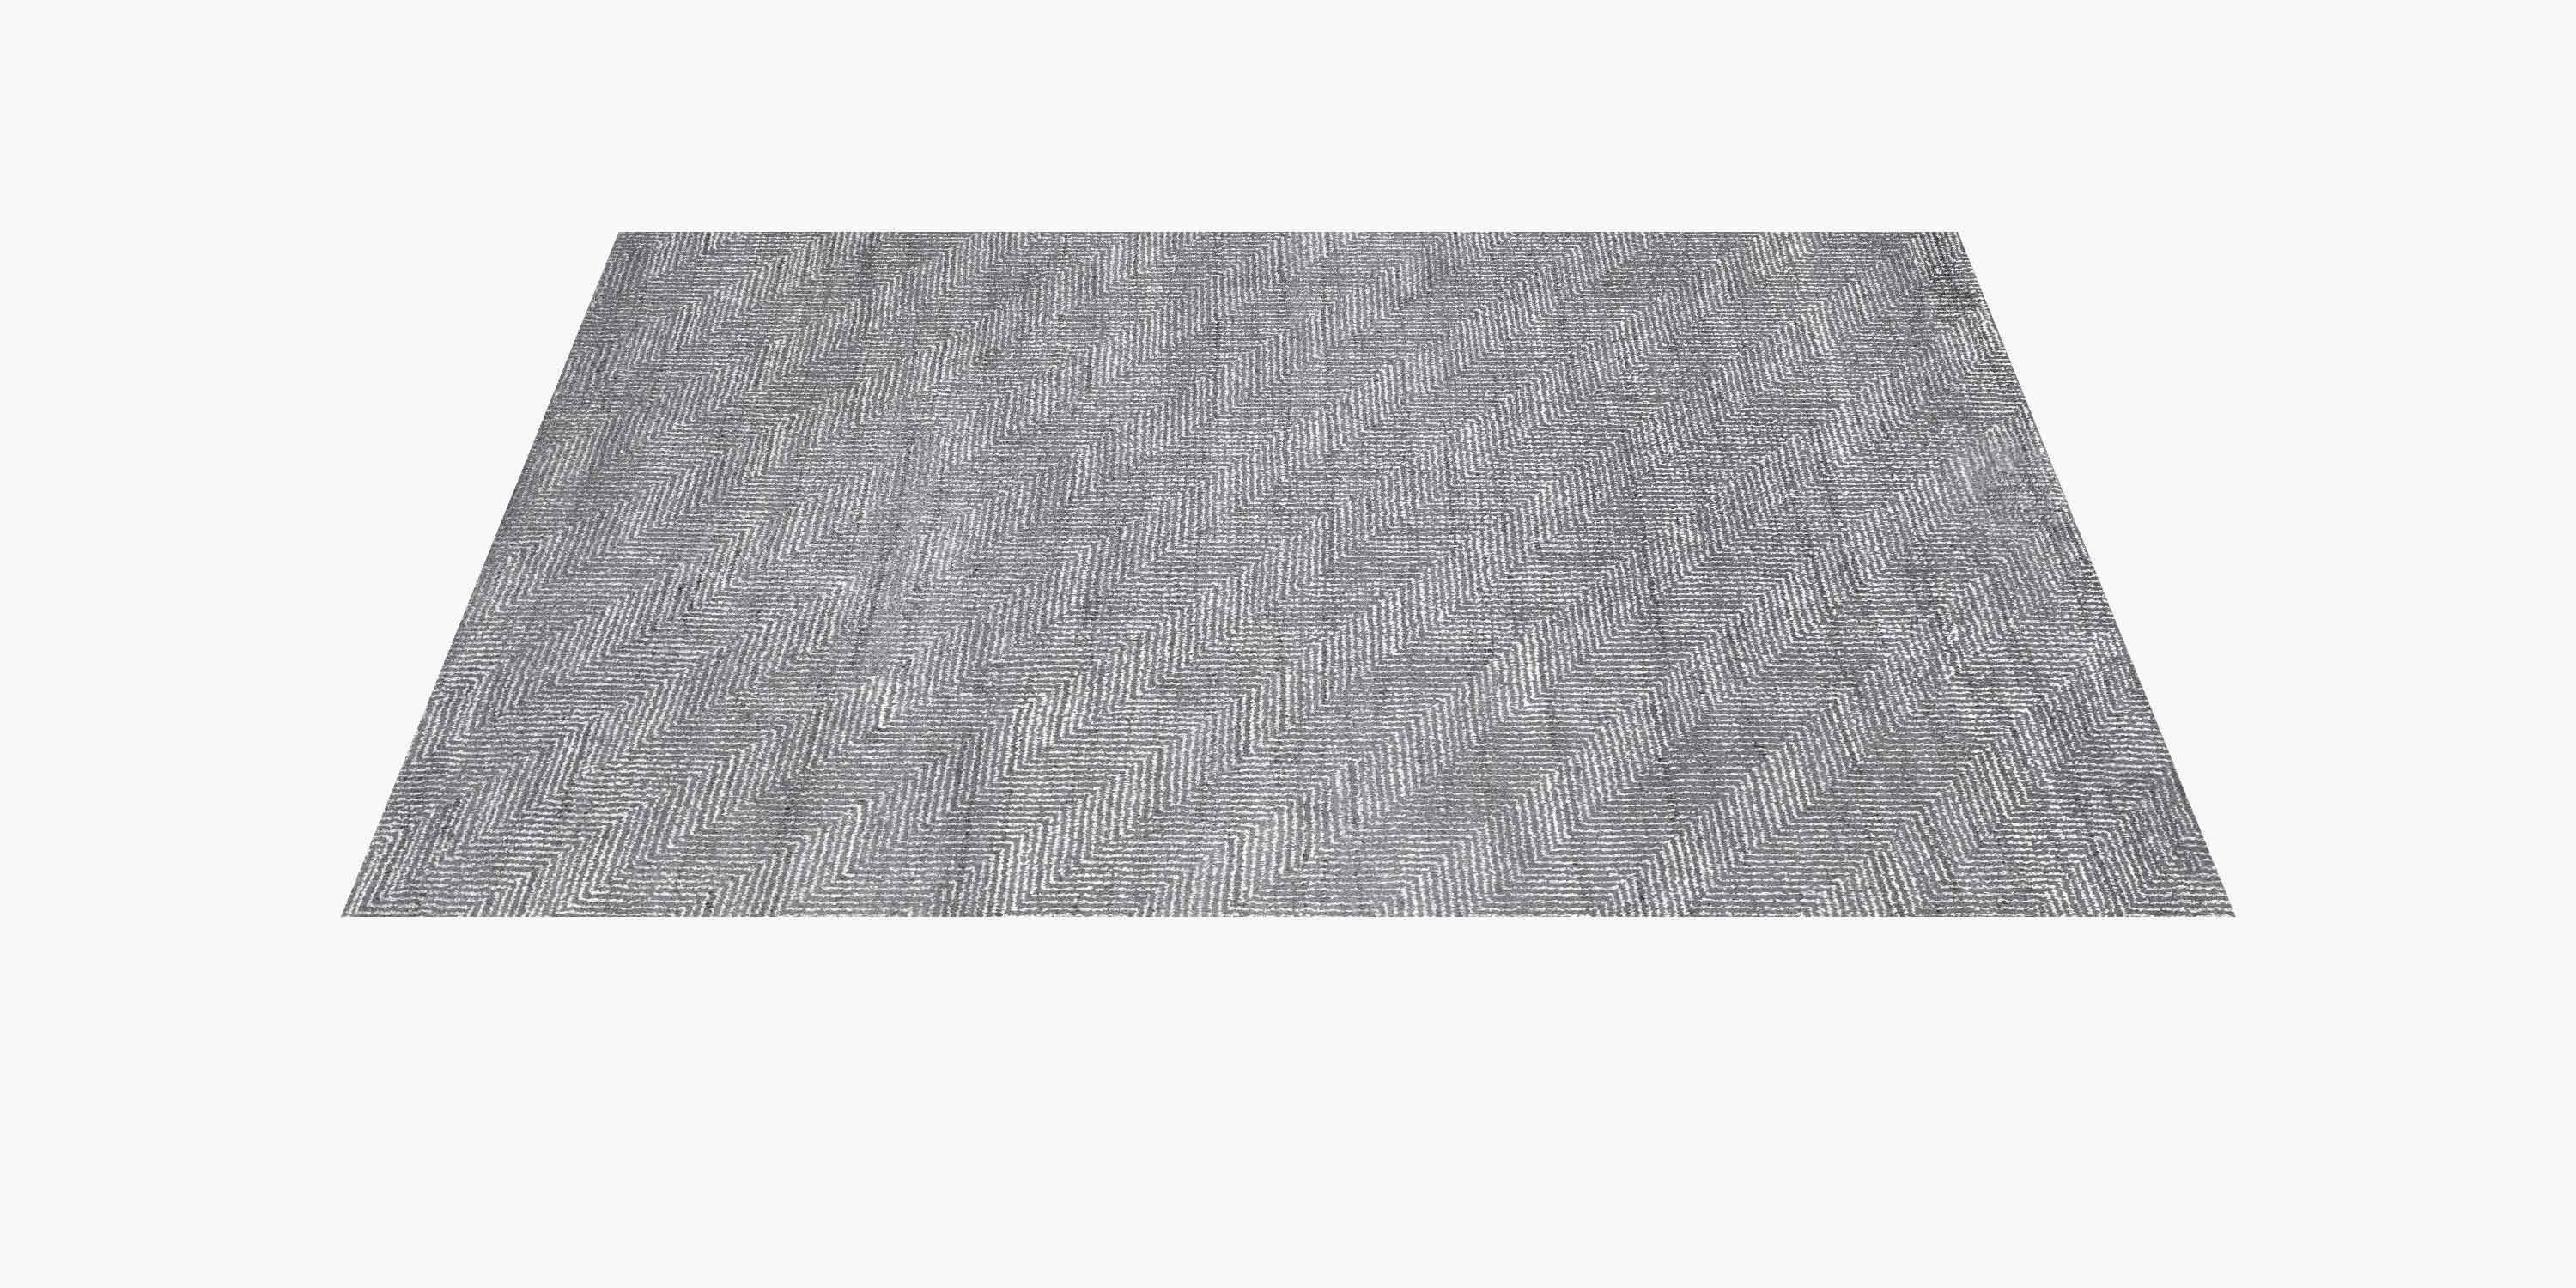 For Sale: Beige (Sand) Ben Soleimani Vello Rug– Hand-knotted Wool + Viscose Ash/Silver 10'x14' 2